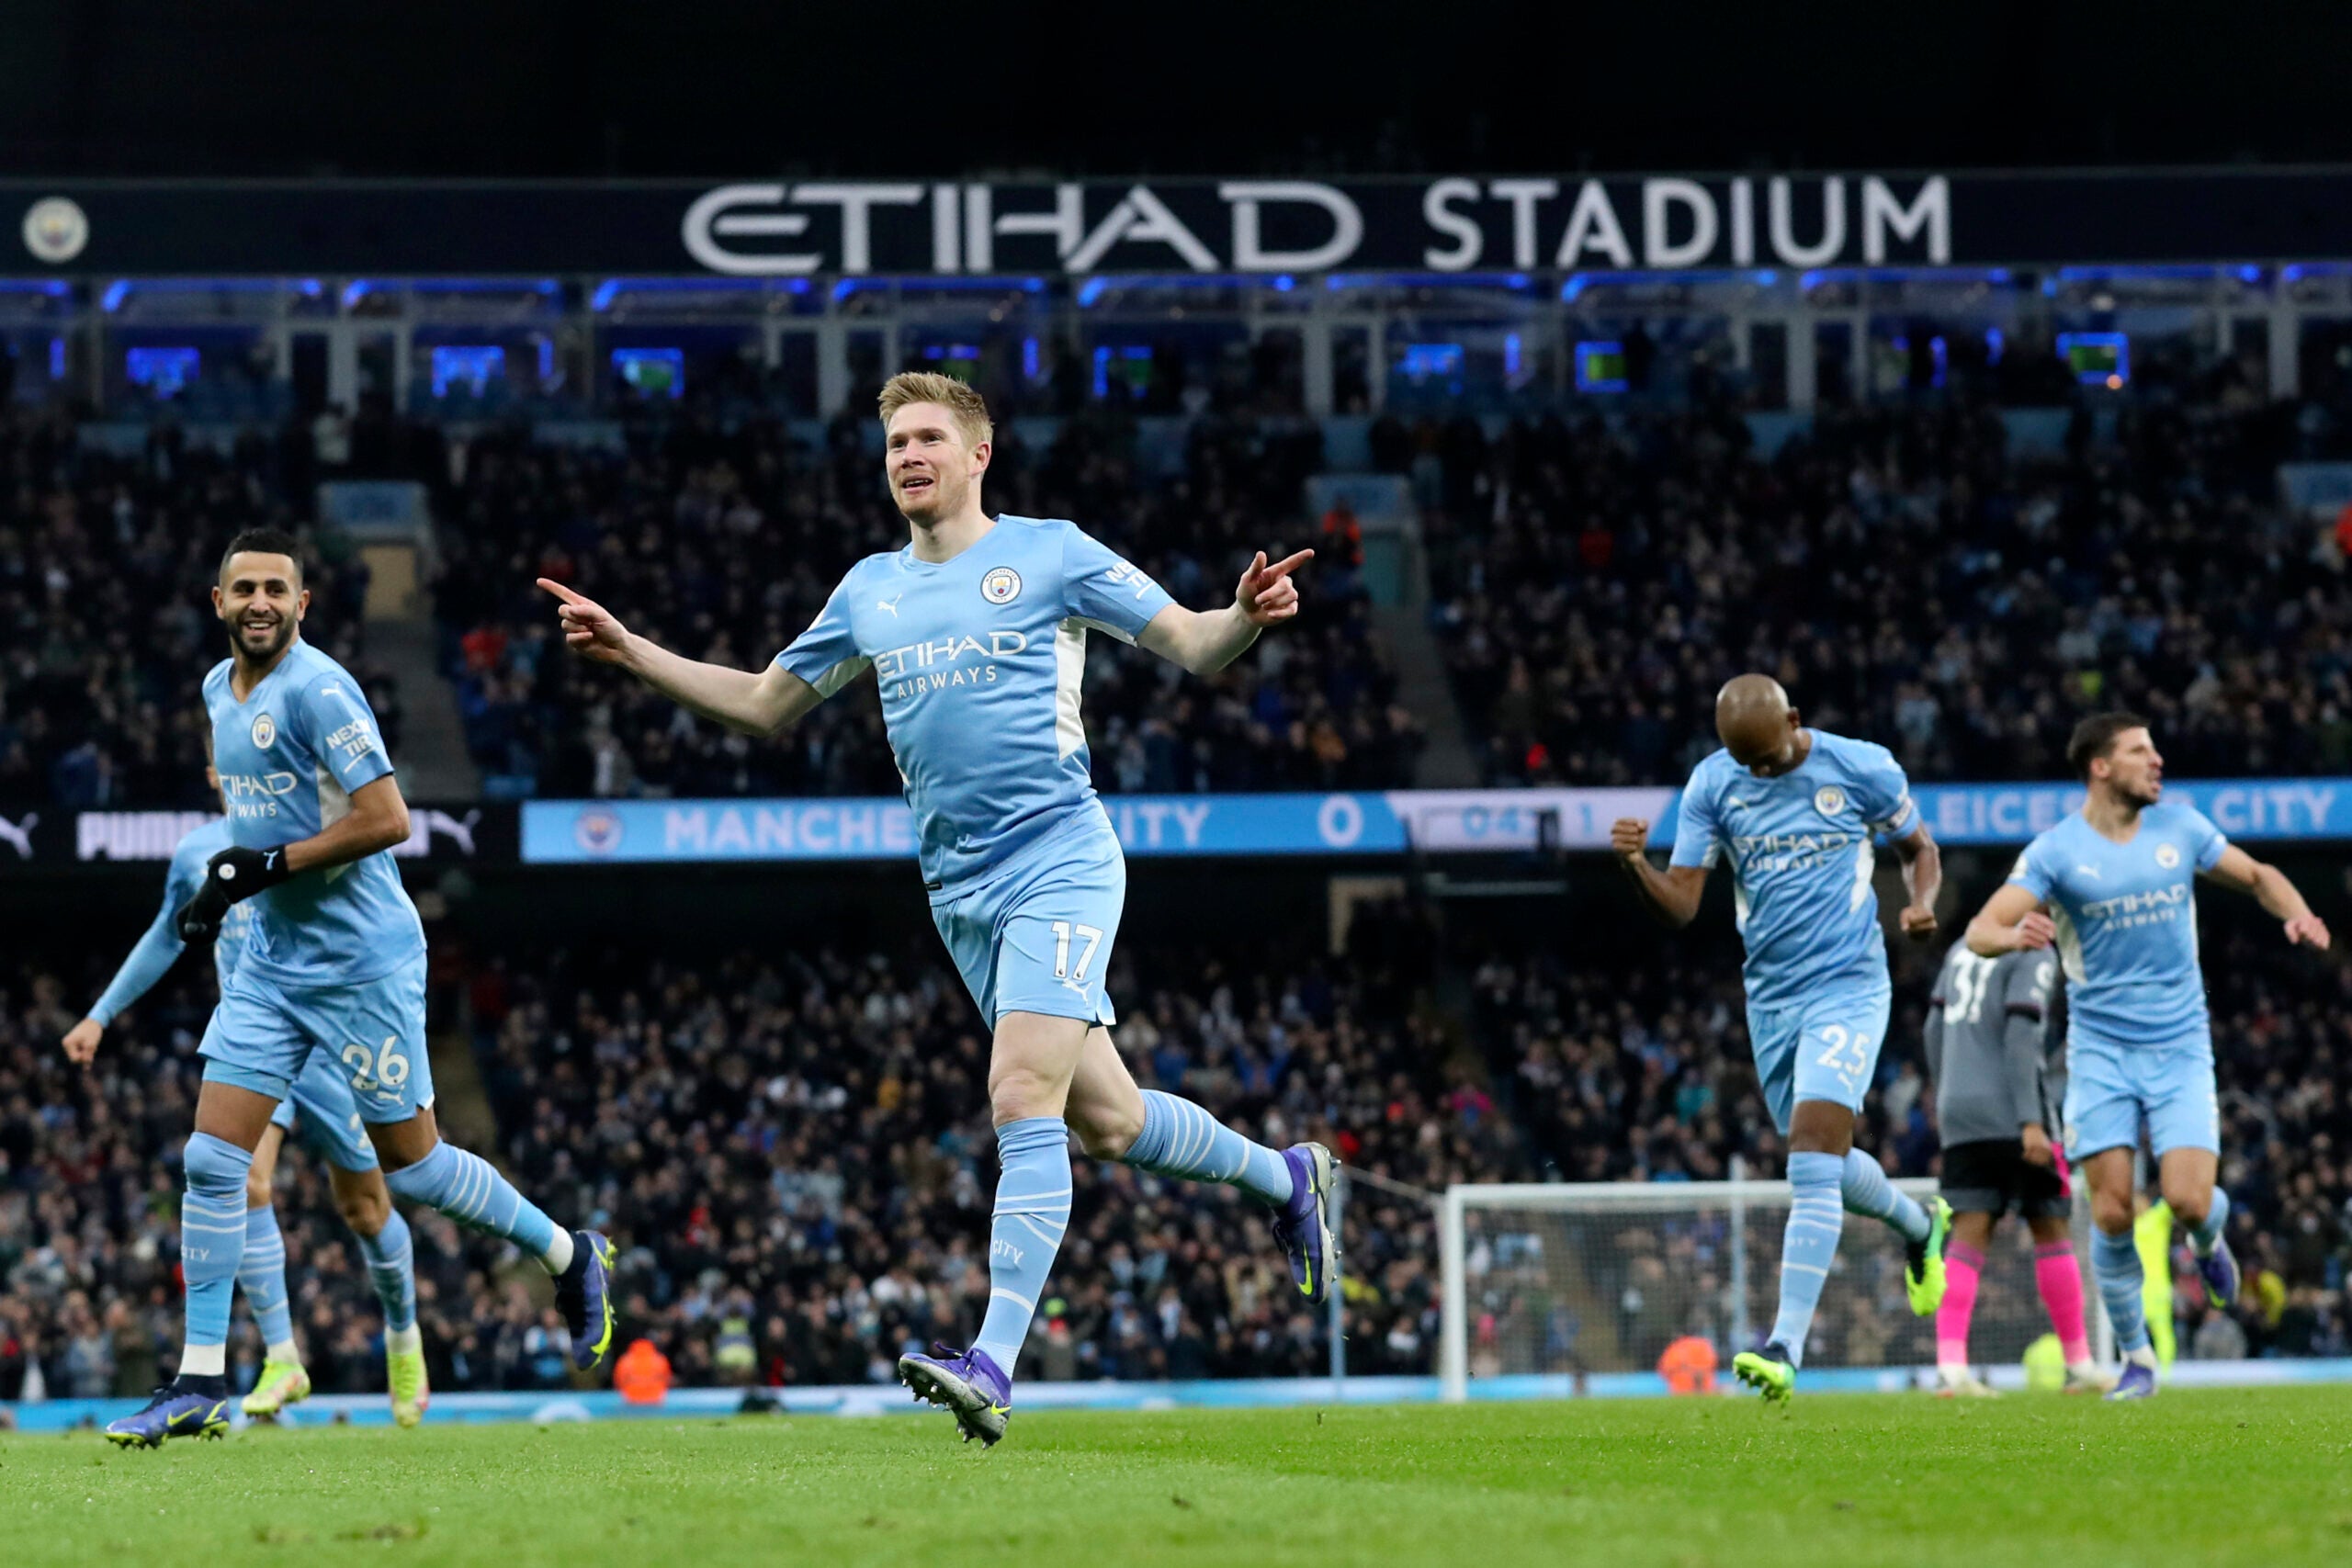 Manchester City's Kevin De Bruyne, center, celebrates after scoring the opening goal during the English Premier League soccer match between Manchester City and Leicester City at Etihad stadium in Manchester, England, Sunday, Dec. 26, 2021.